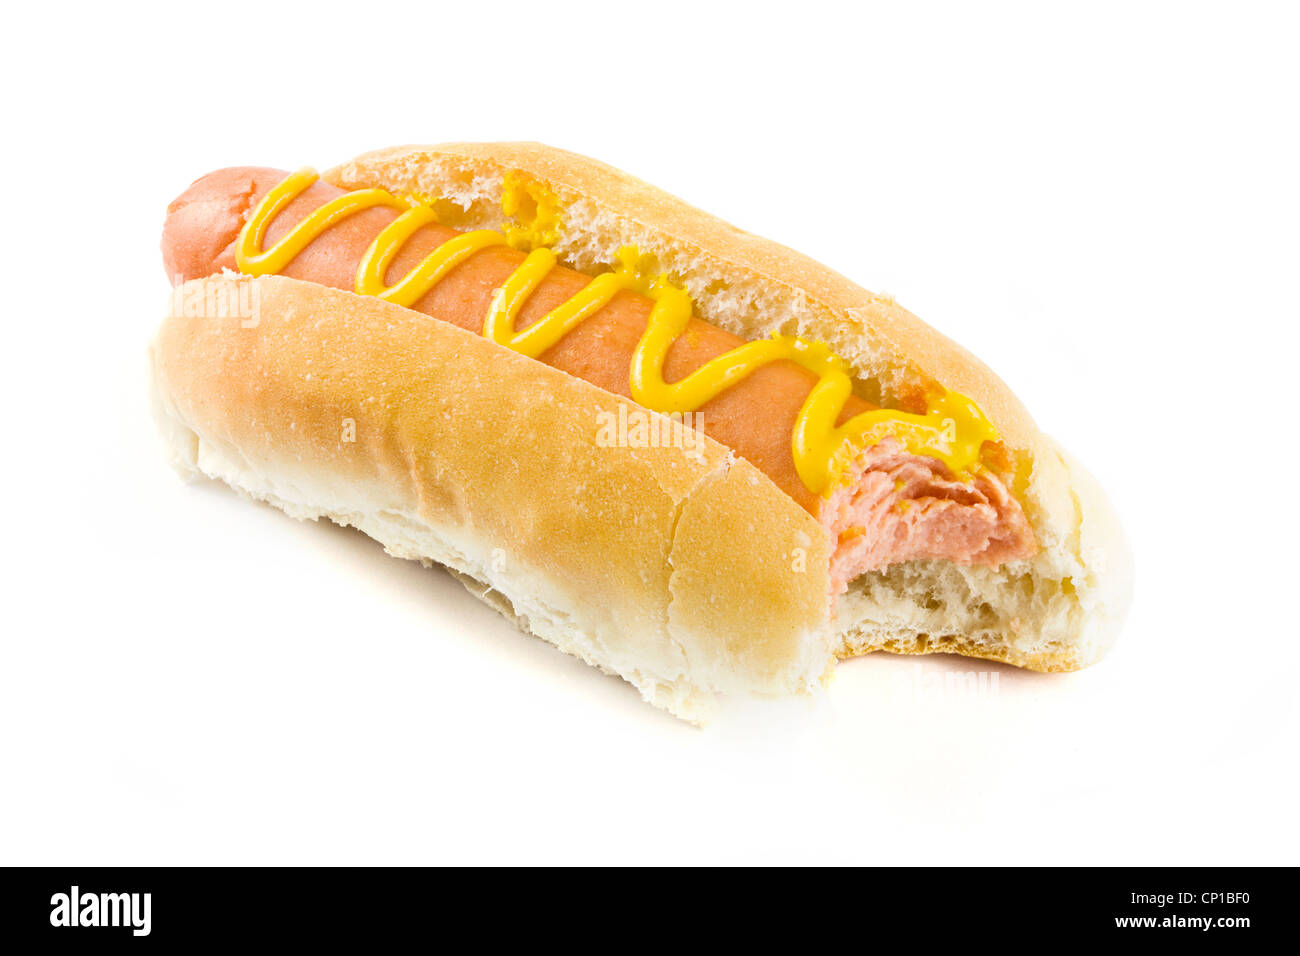 Hot dog with missing bite and mustard on a white background Stock Photo